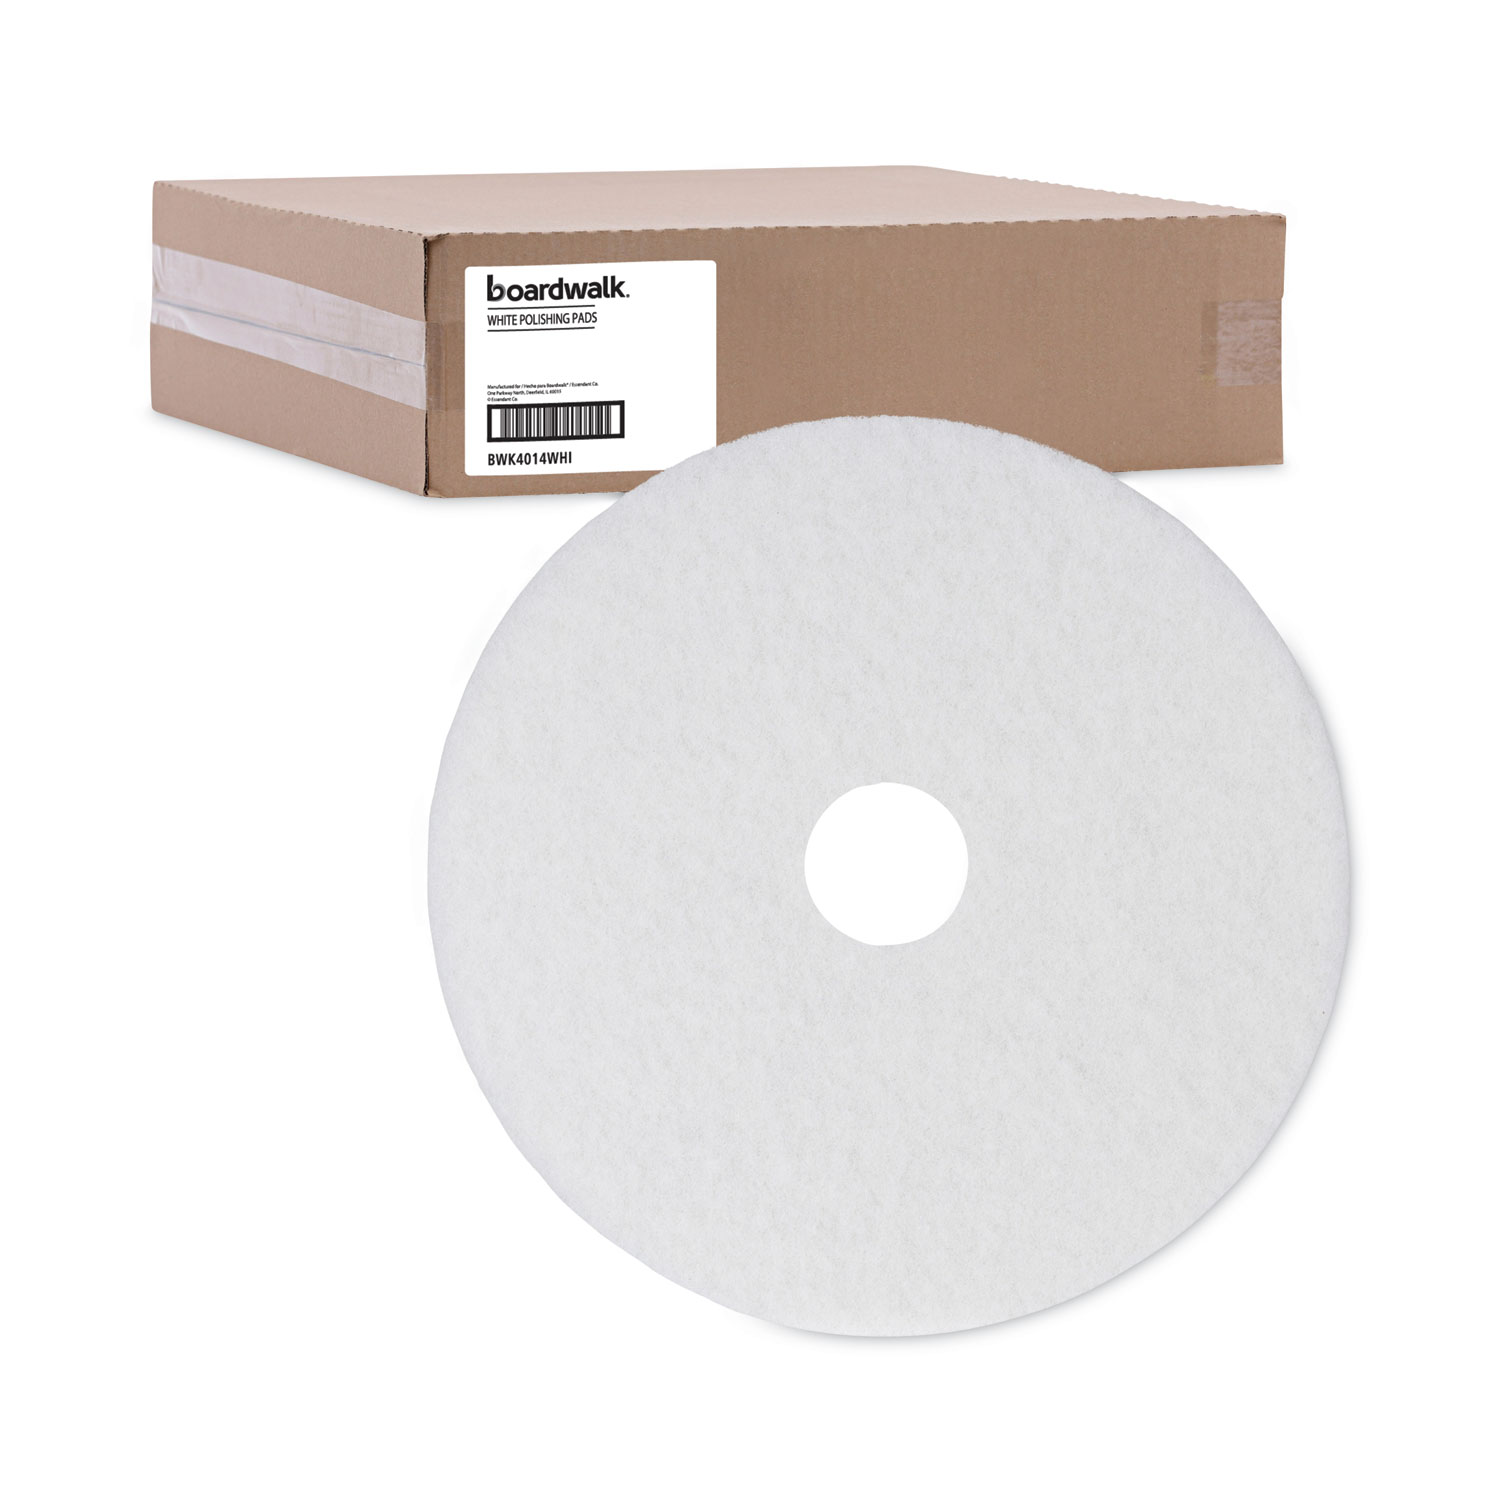 5 PADS IN BOX PROLINK 14" WHITE POLISHING FLOOR PADS 